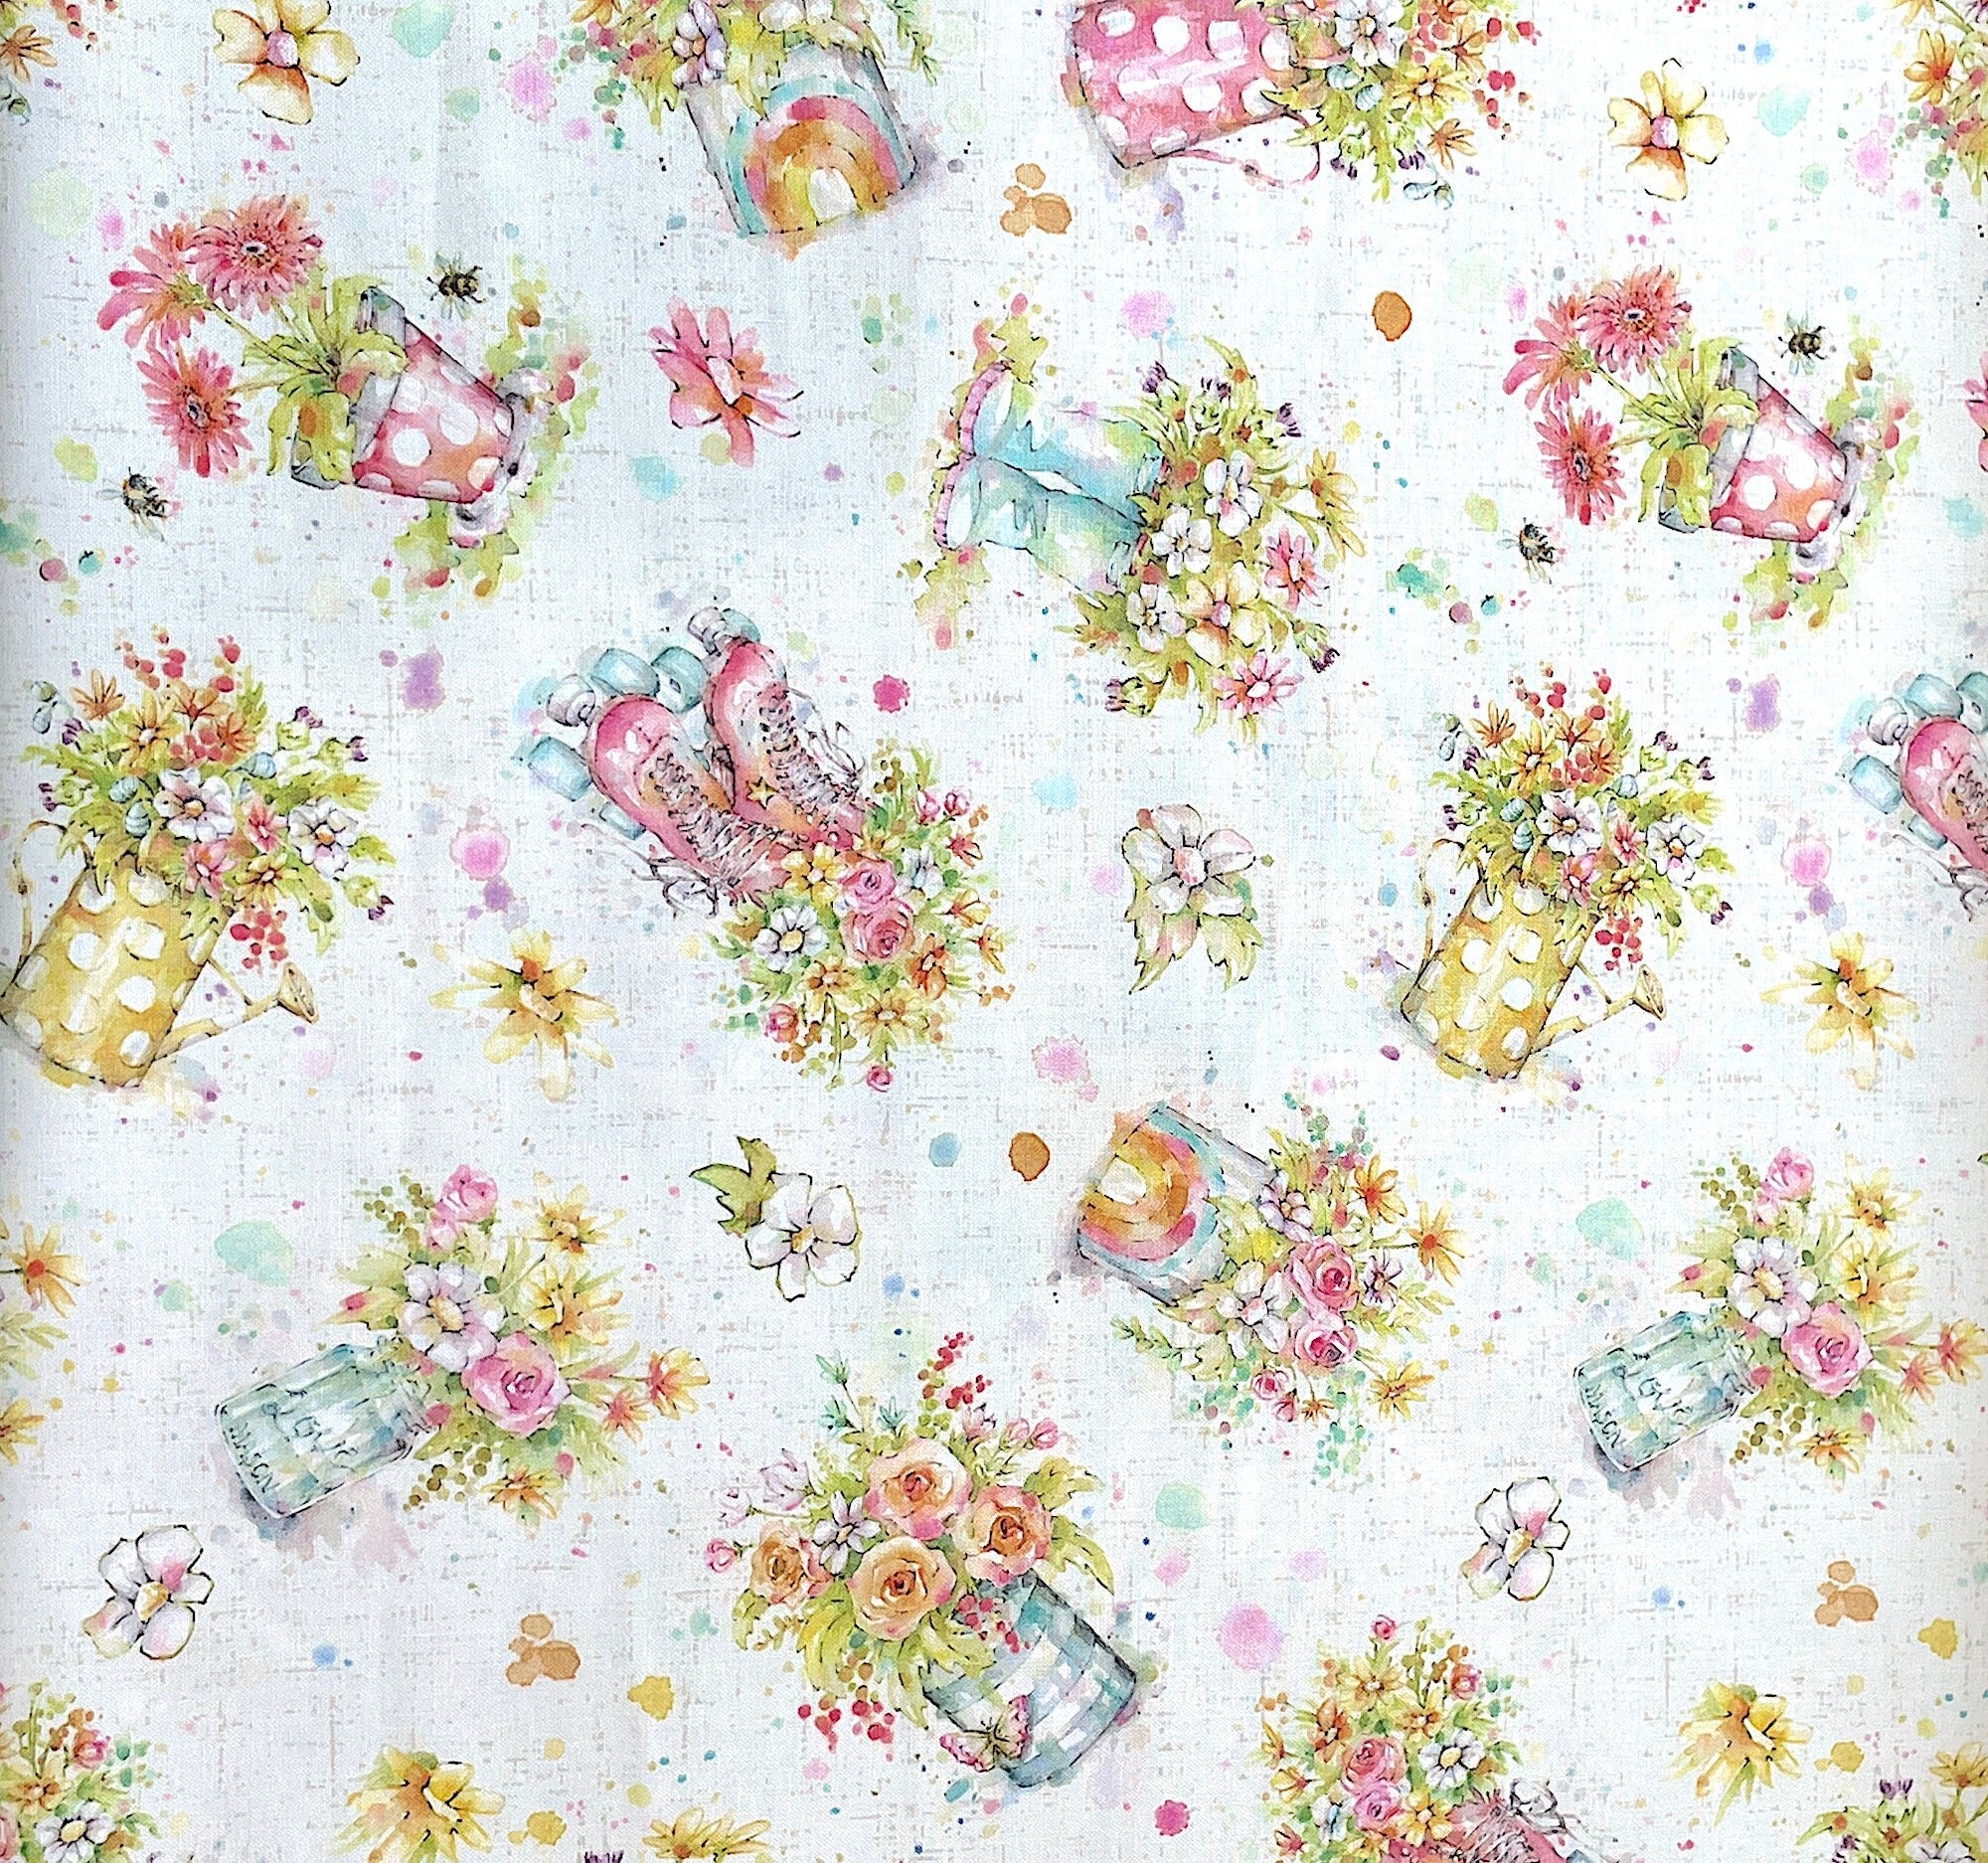 This off white cotton fabric is part of the Boots and Blooms collection by P&B Textiles. This fabric is covered with bouquets of flowers in roller skates, boots, watering cans, jars and pots.